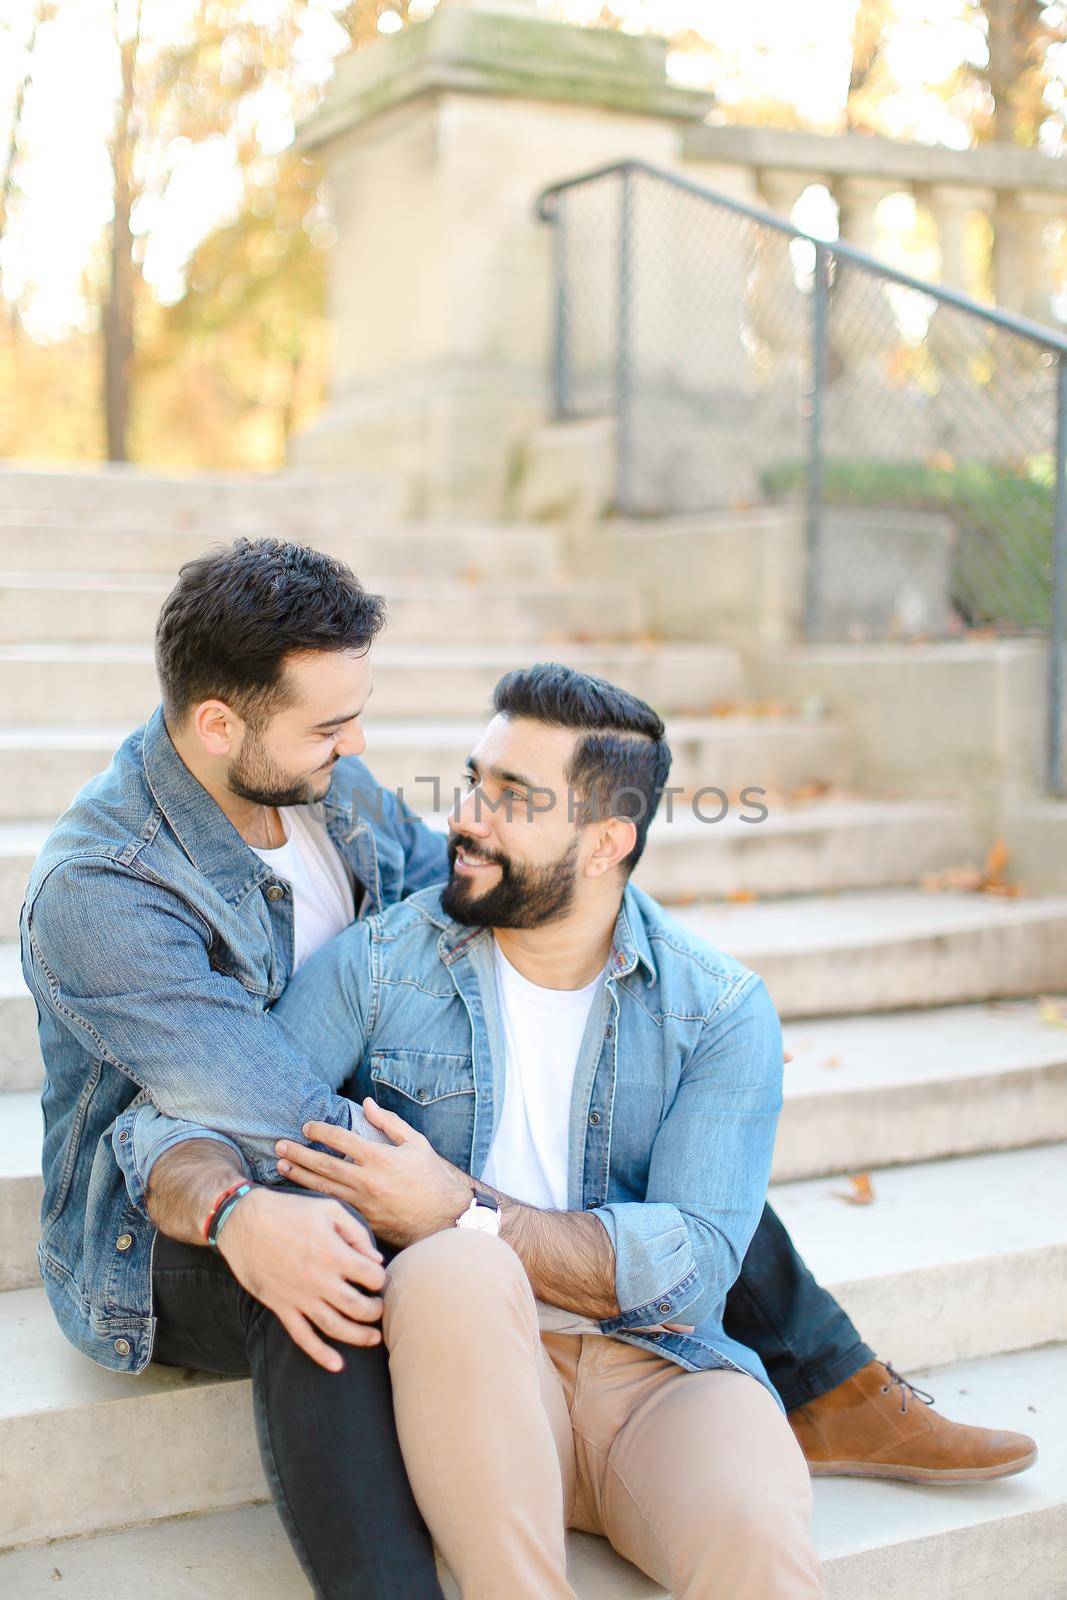 Caucasian american young gays sitting on concrete stairs and hugging, wearing jeans shirts. Concept of same sex couple and lgbt.